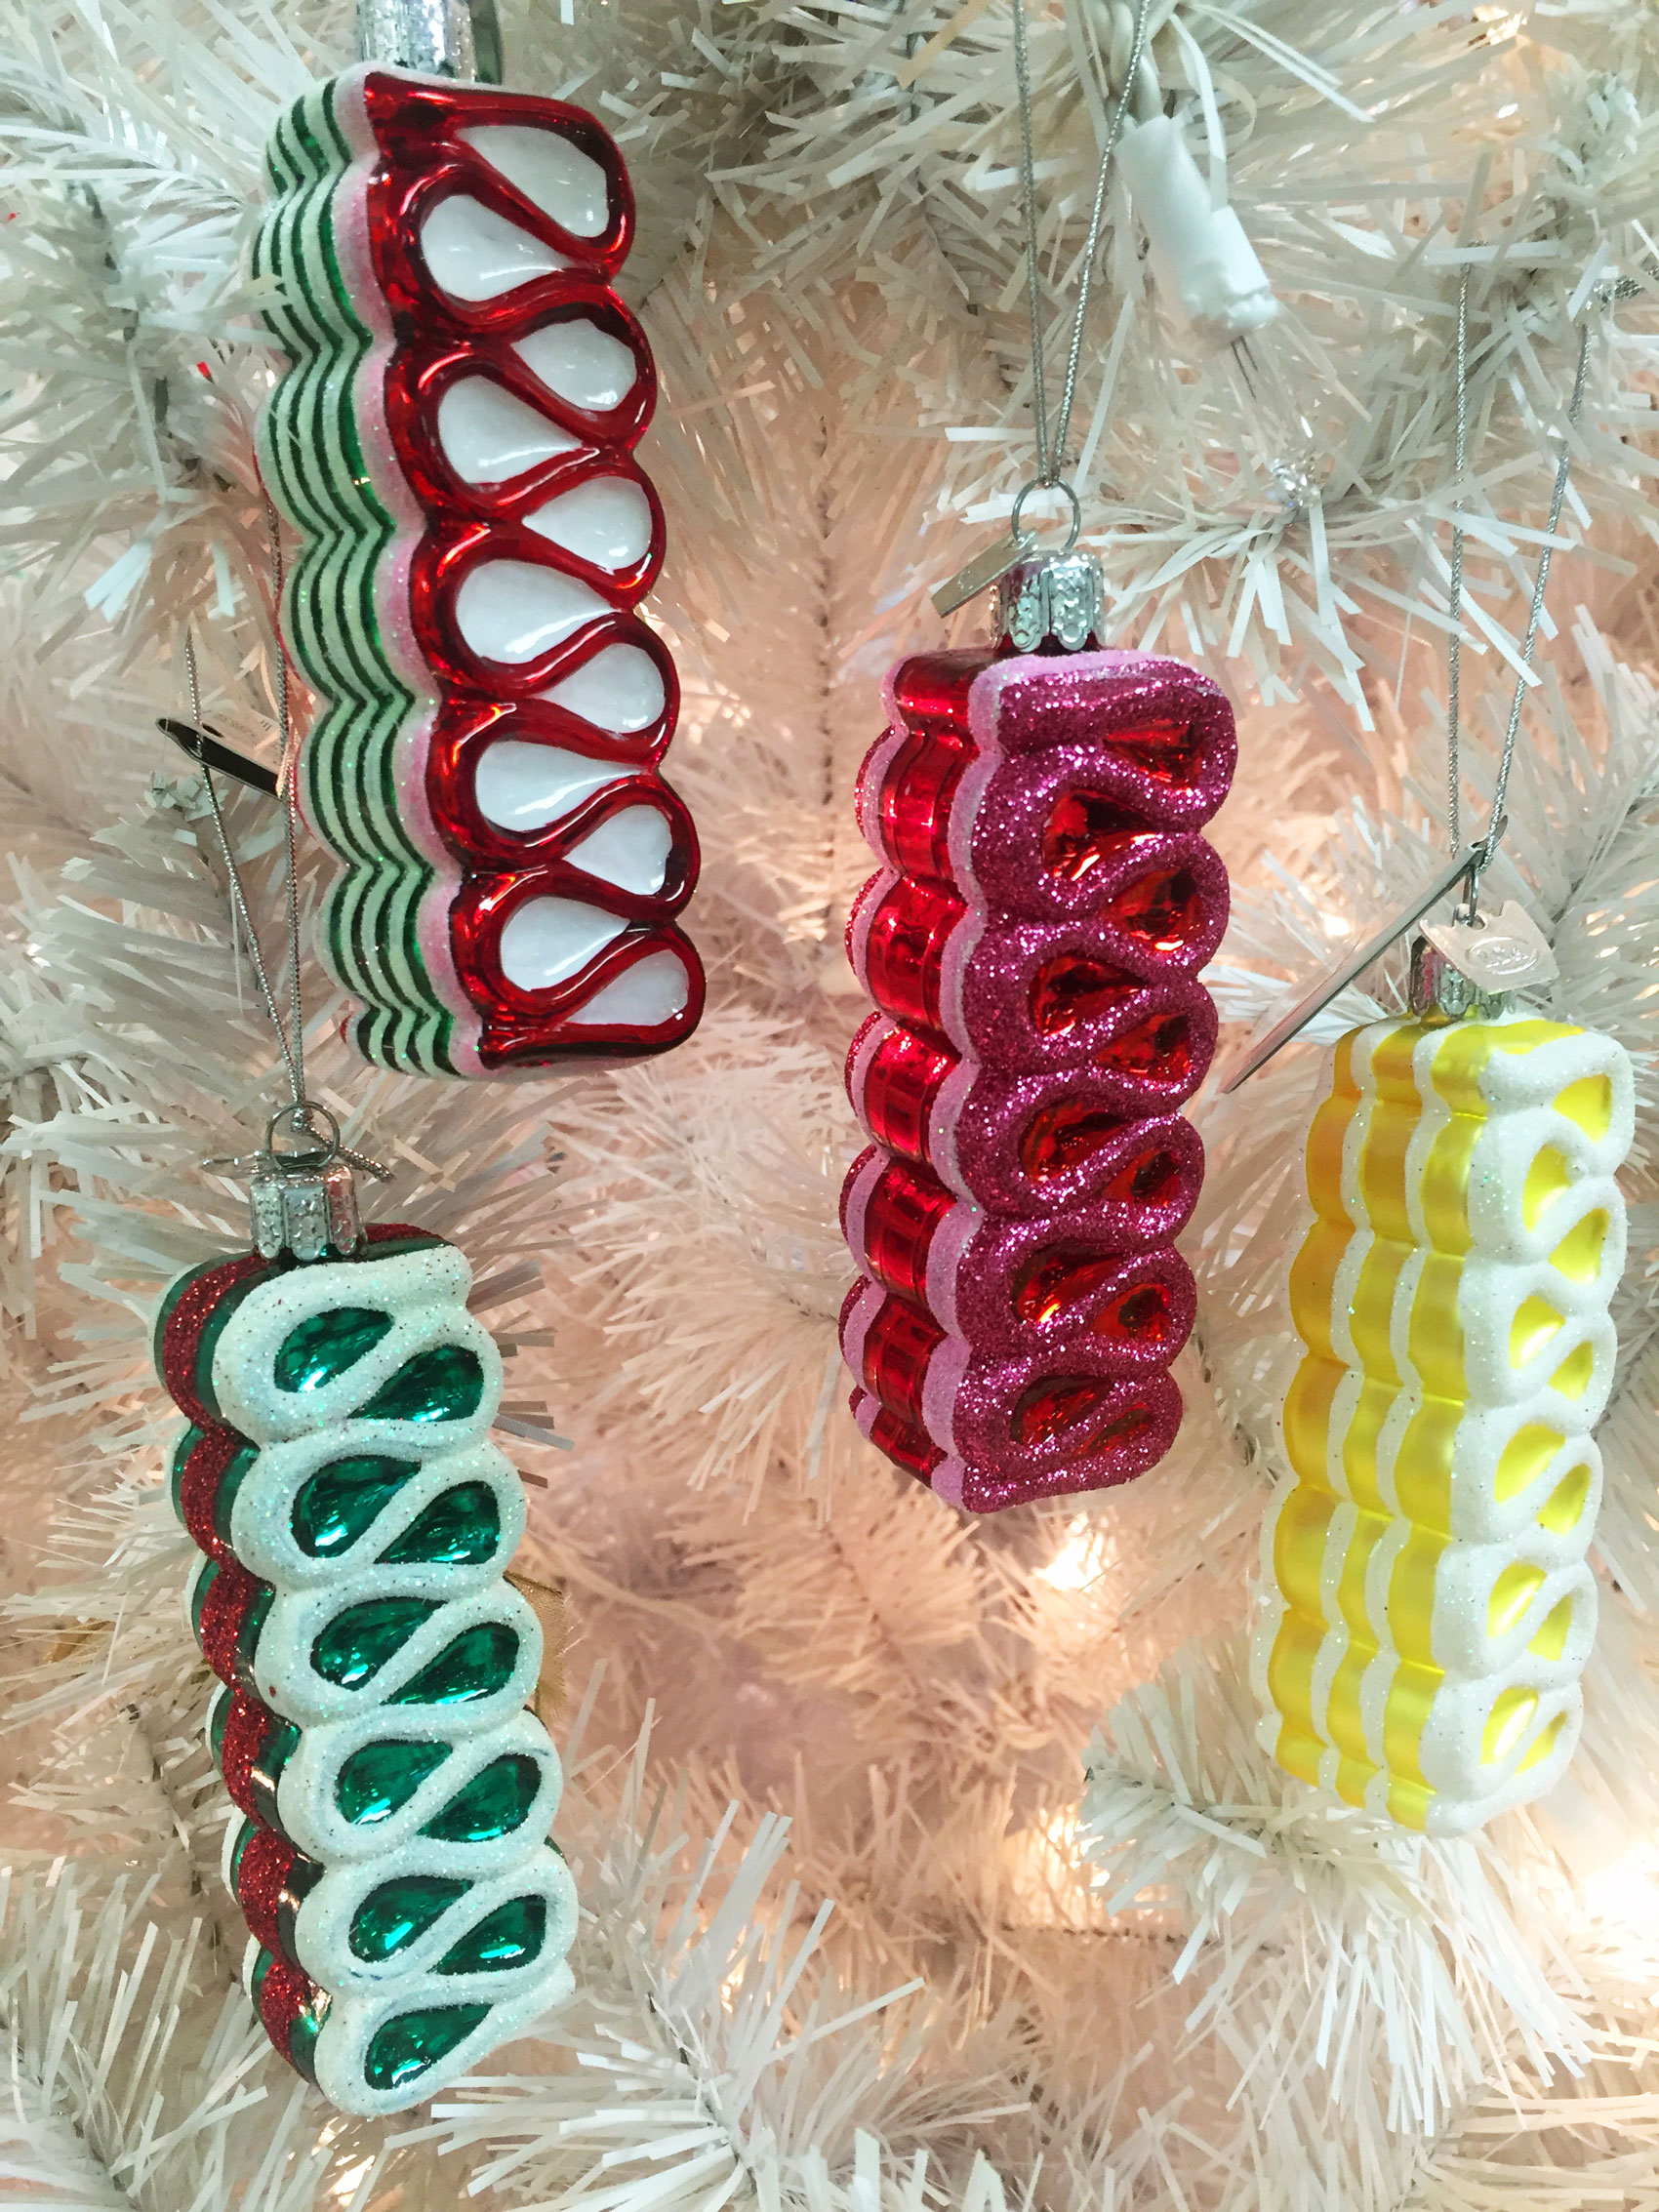 Sets of ribbon candy ornaments in green, red, white, yellow and pink colors | OrnamentShop.com